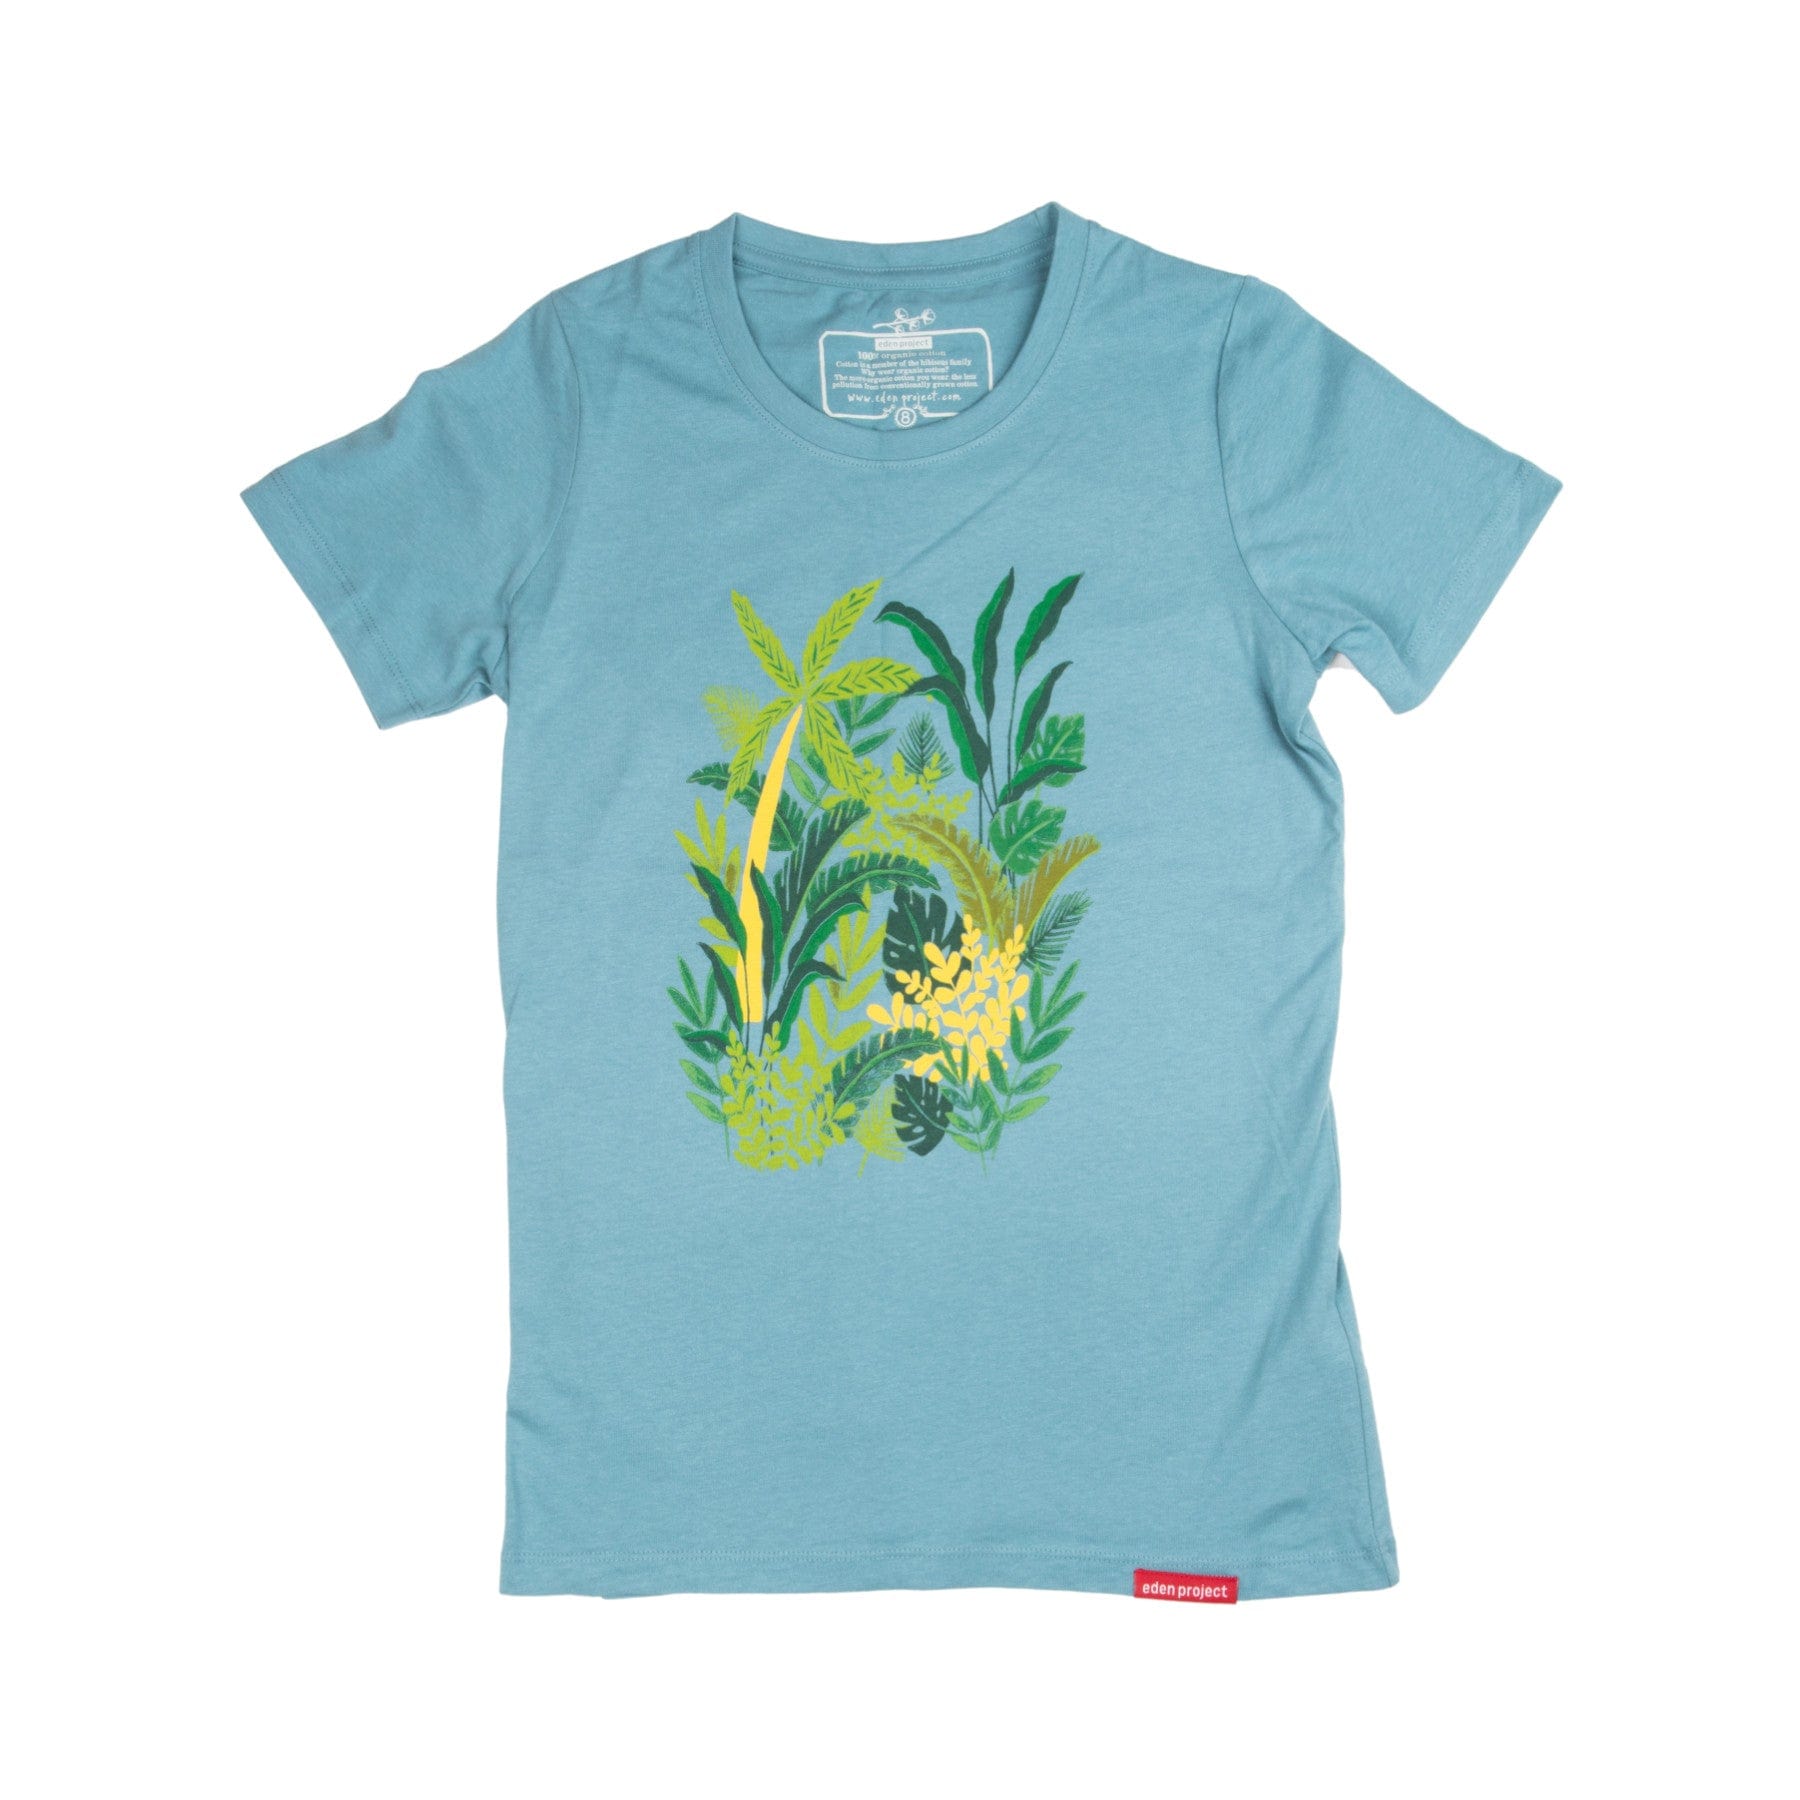 Women's blue t-shirt with tropical plant print design isolated on white background